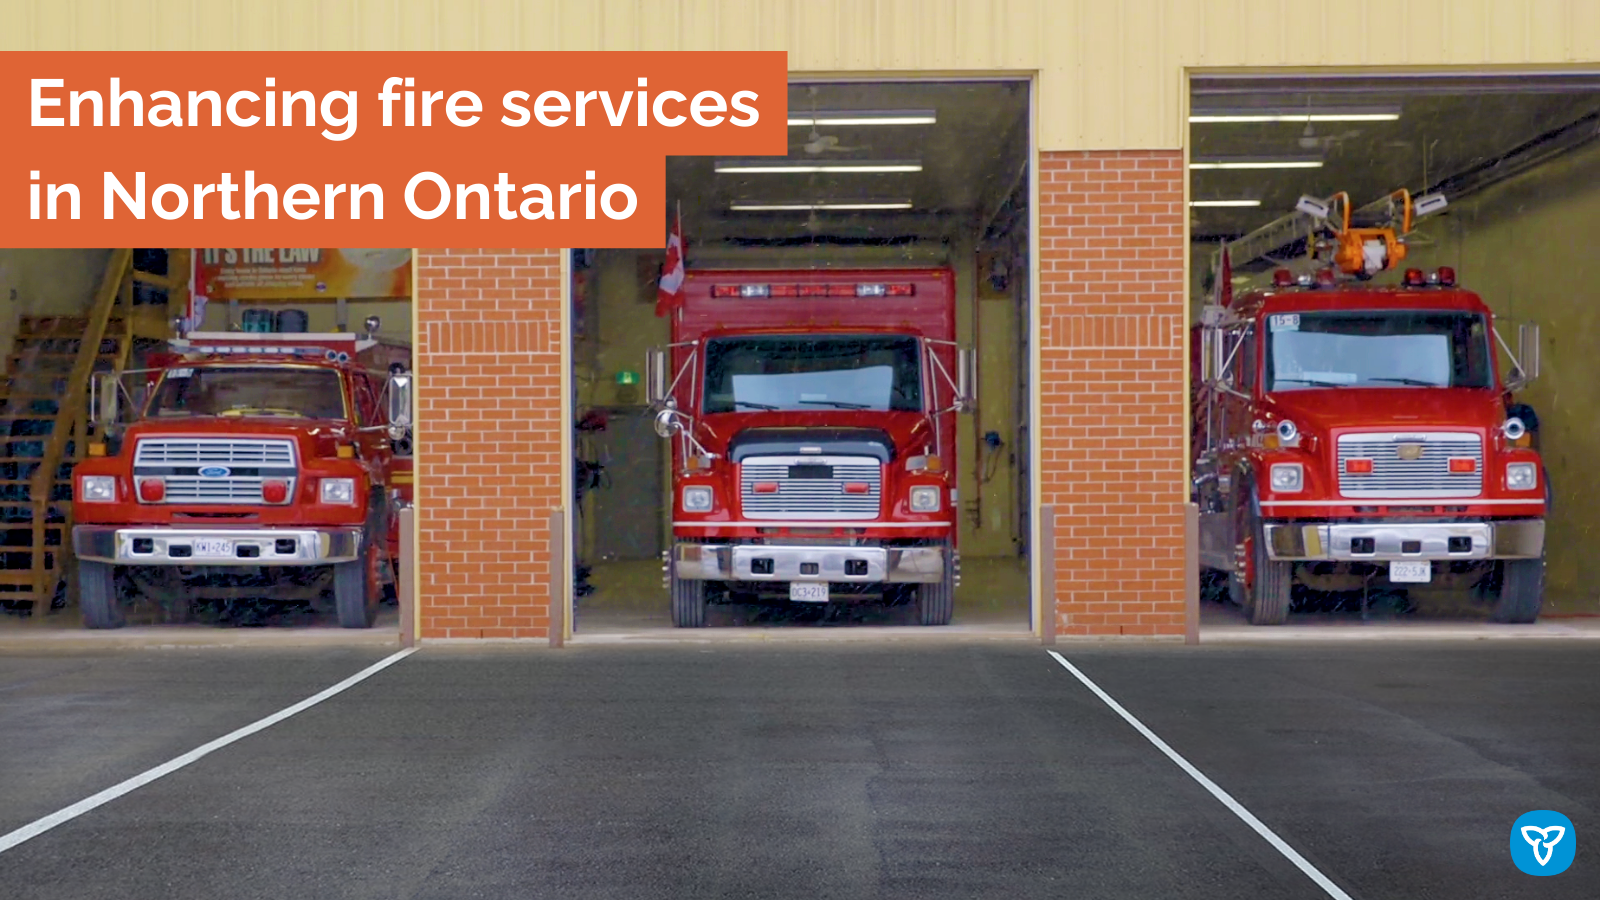 Ontario Investing in Fire Safety in the North